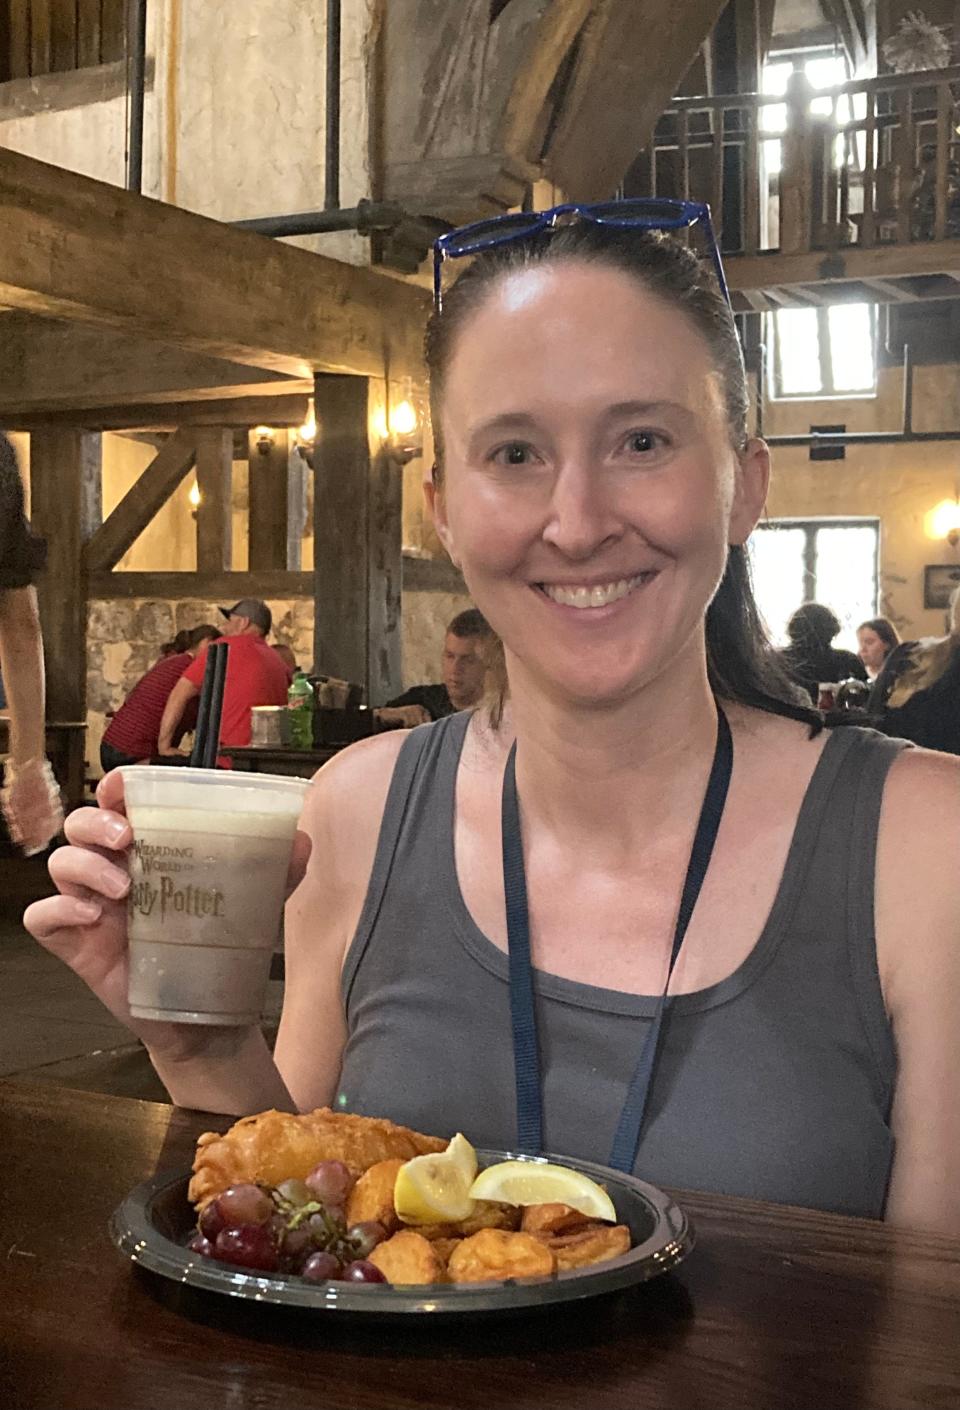 lisa galek smiling and holding food and drinks at Universal